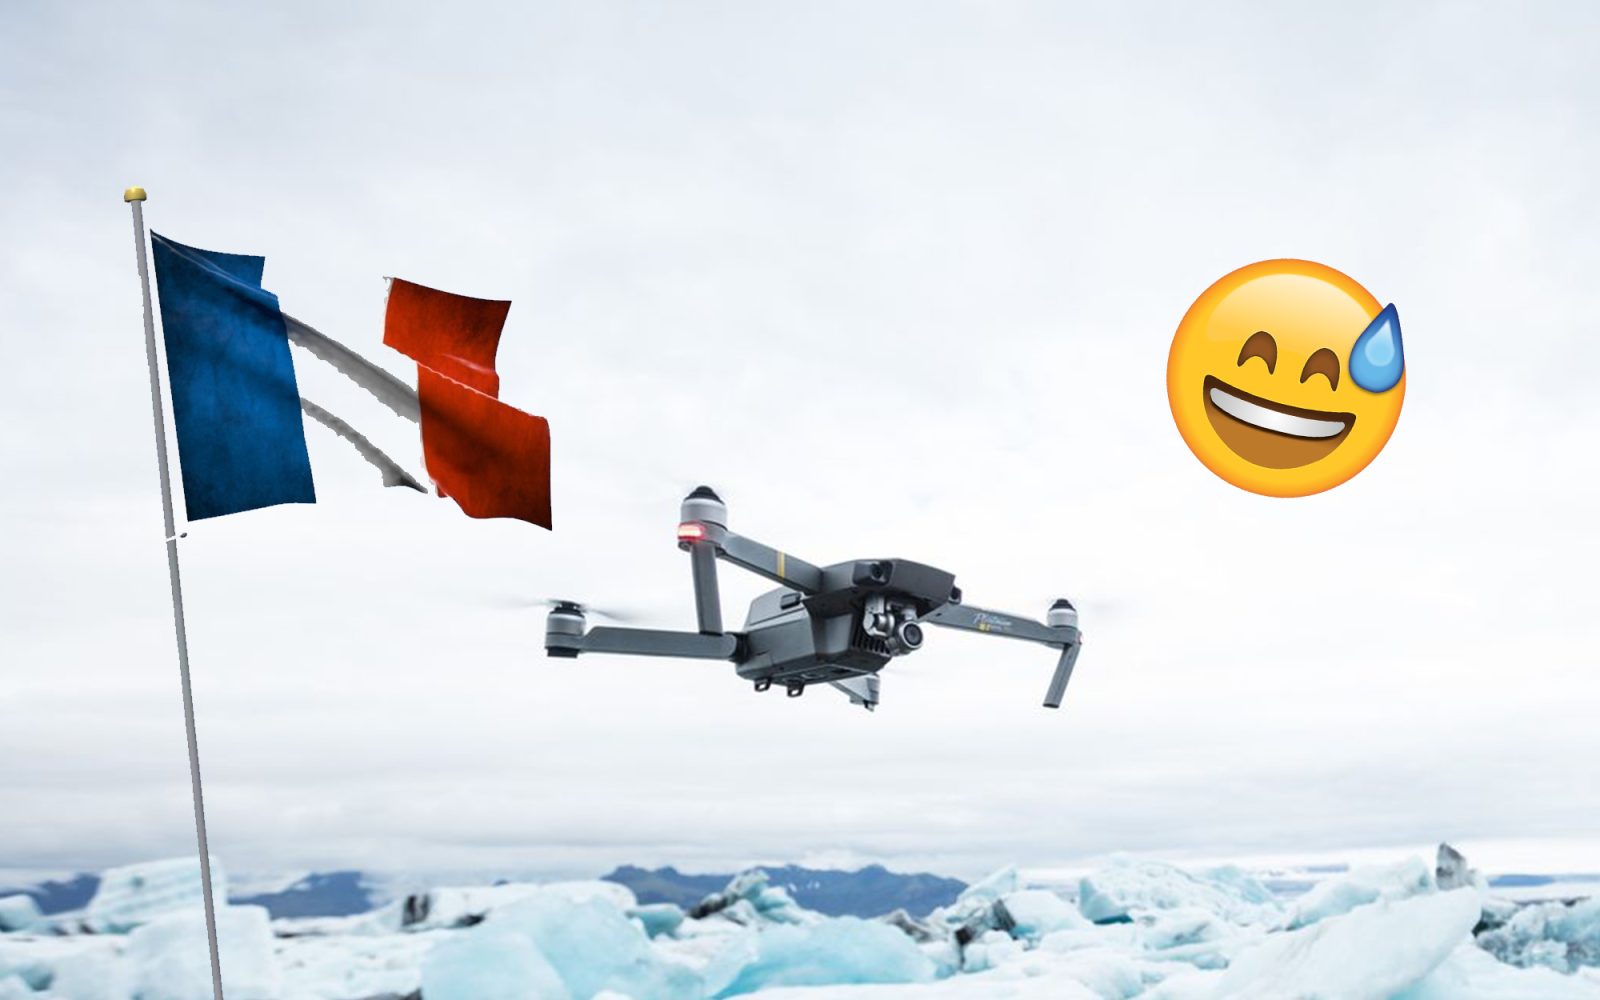 New proposed French drone regulation requires remote drone identification